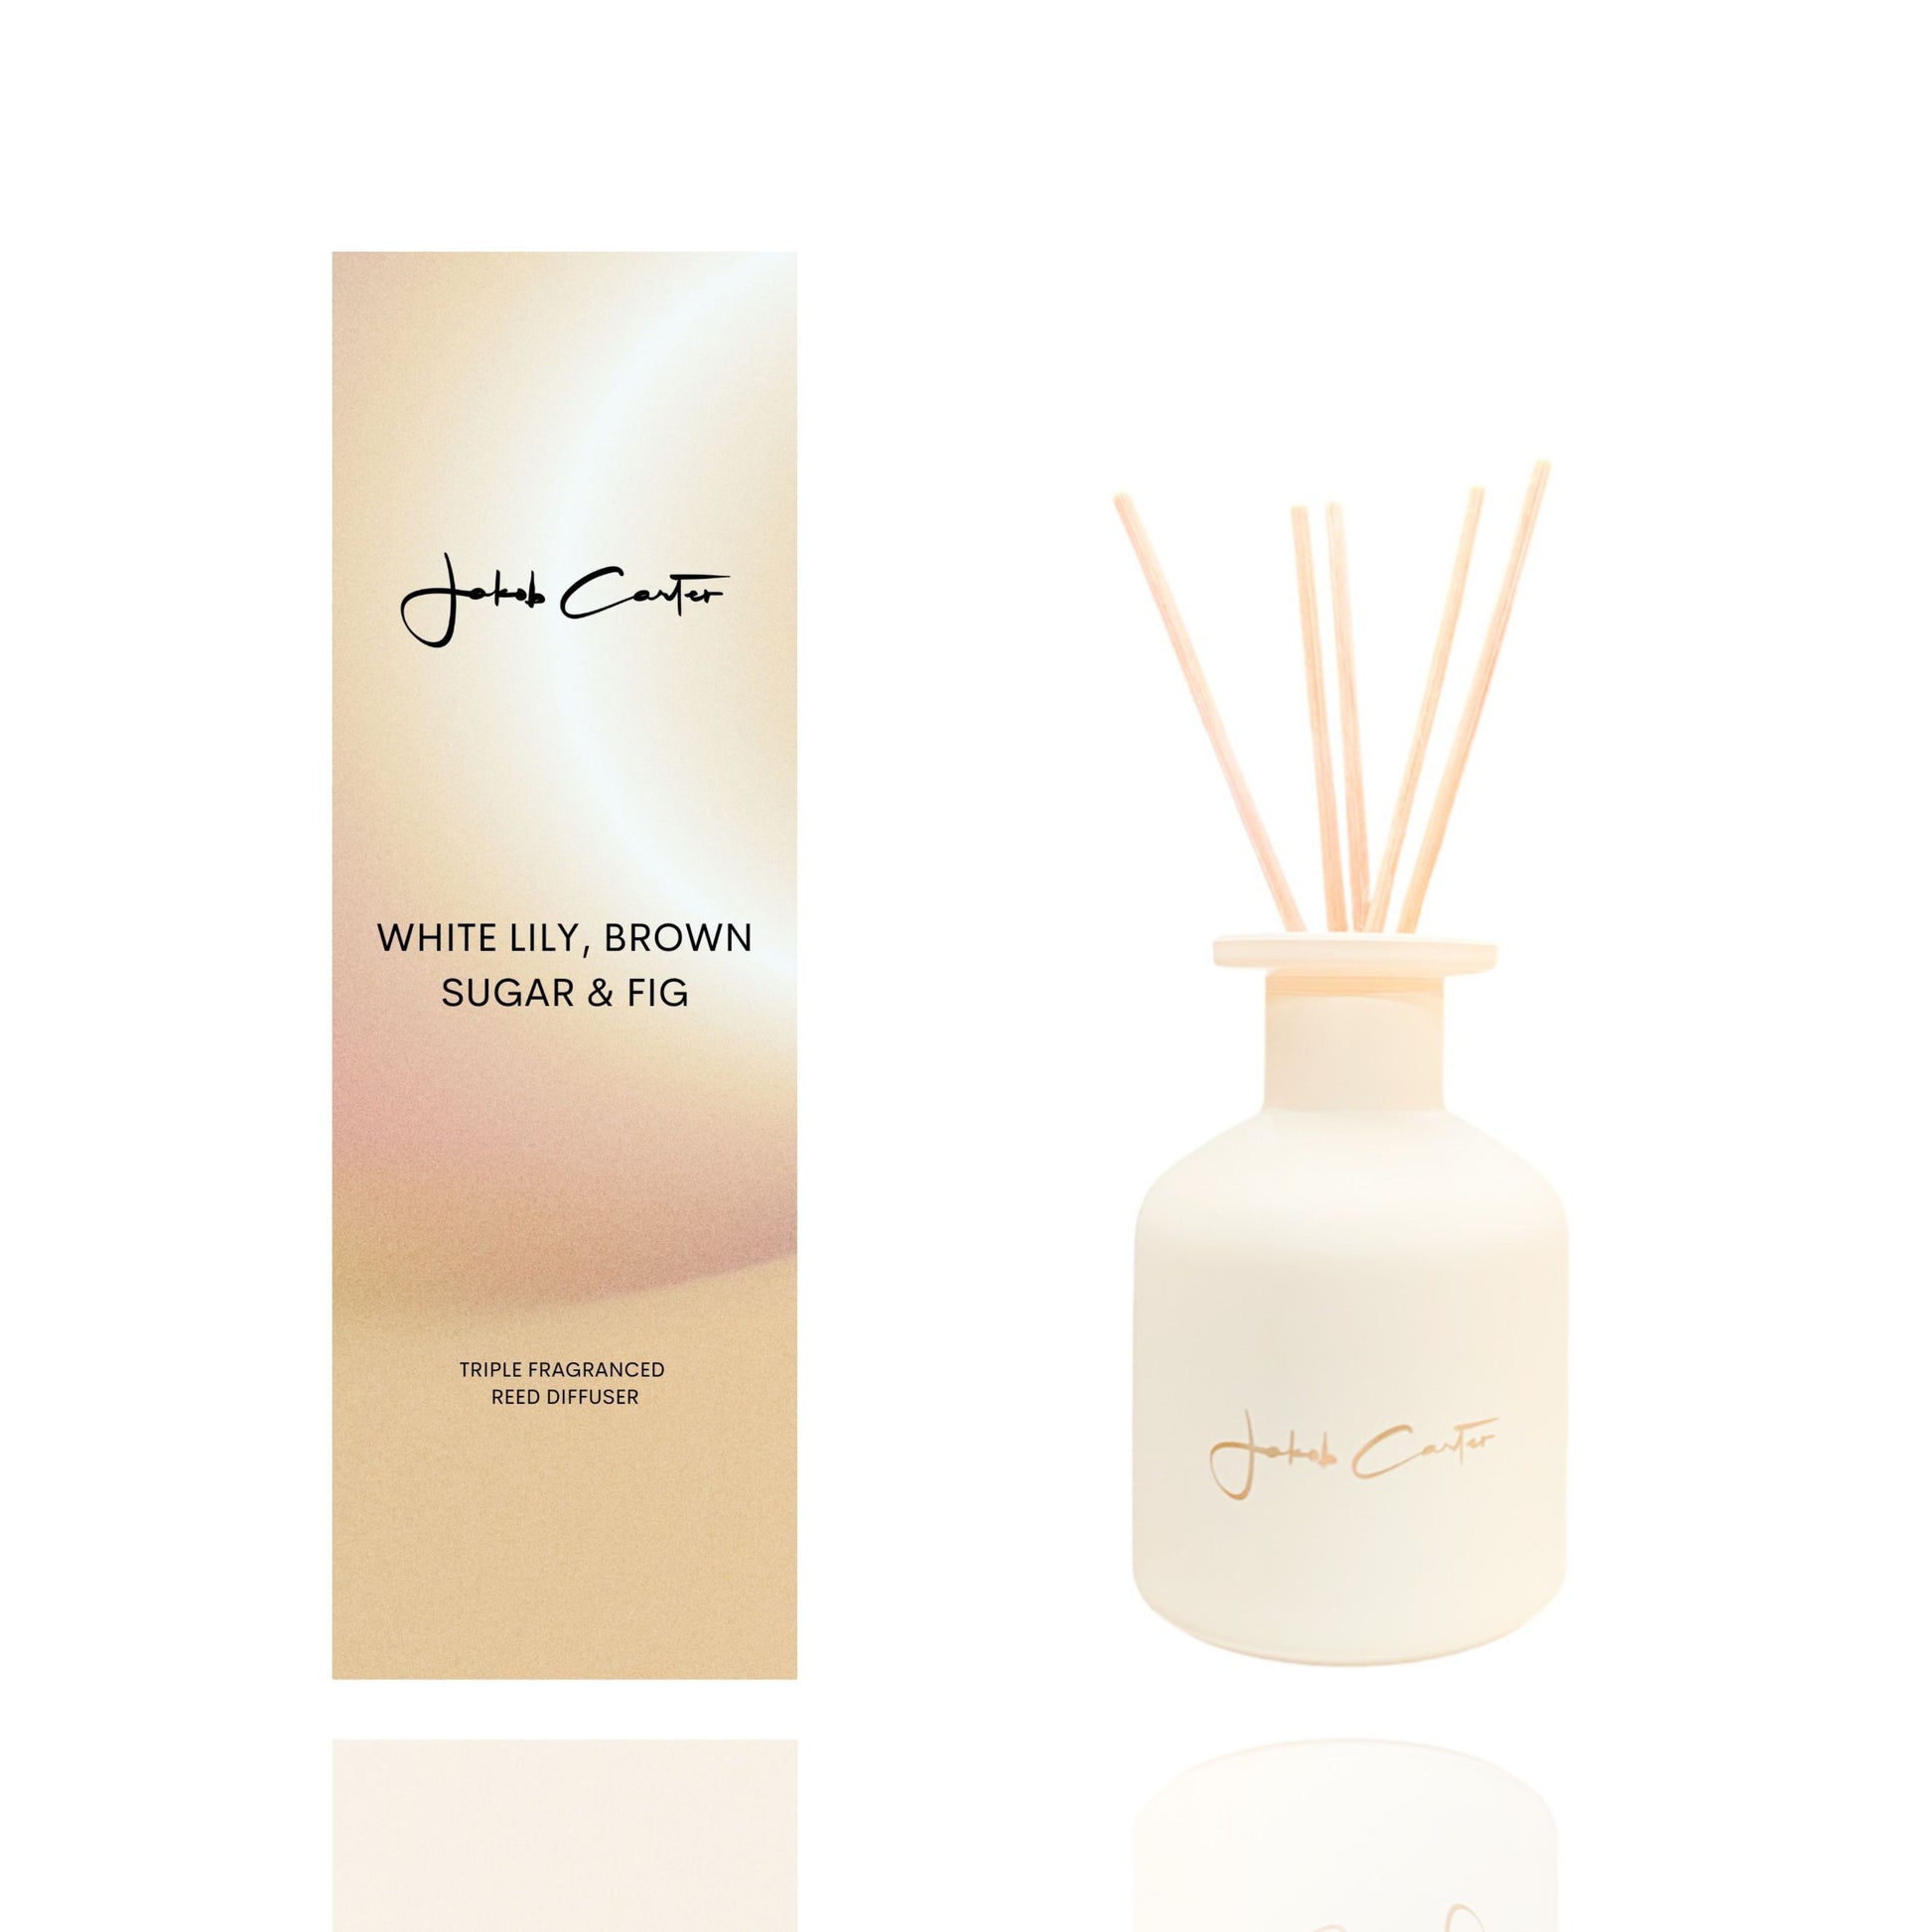 Jakob Carter reed diffuser in white lily, brown sugar and fig